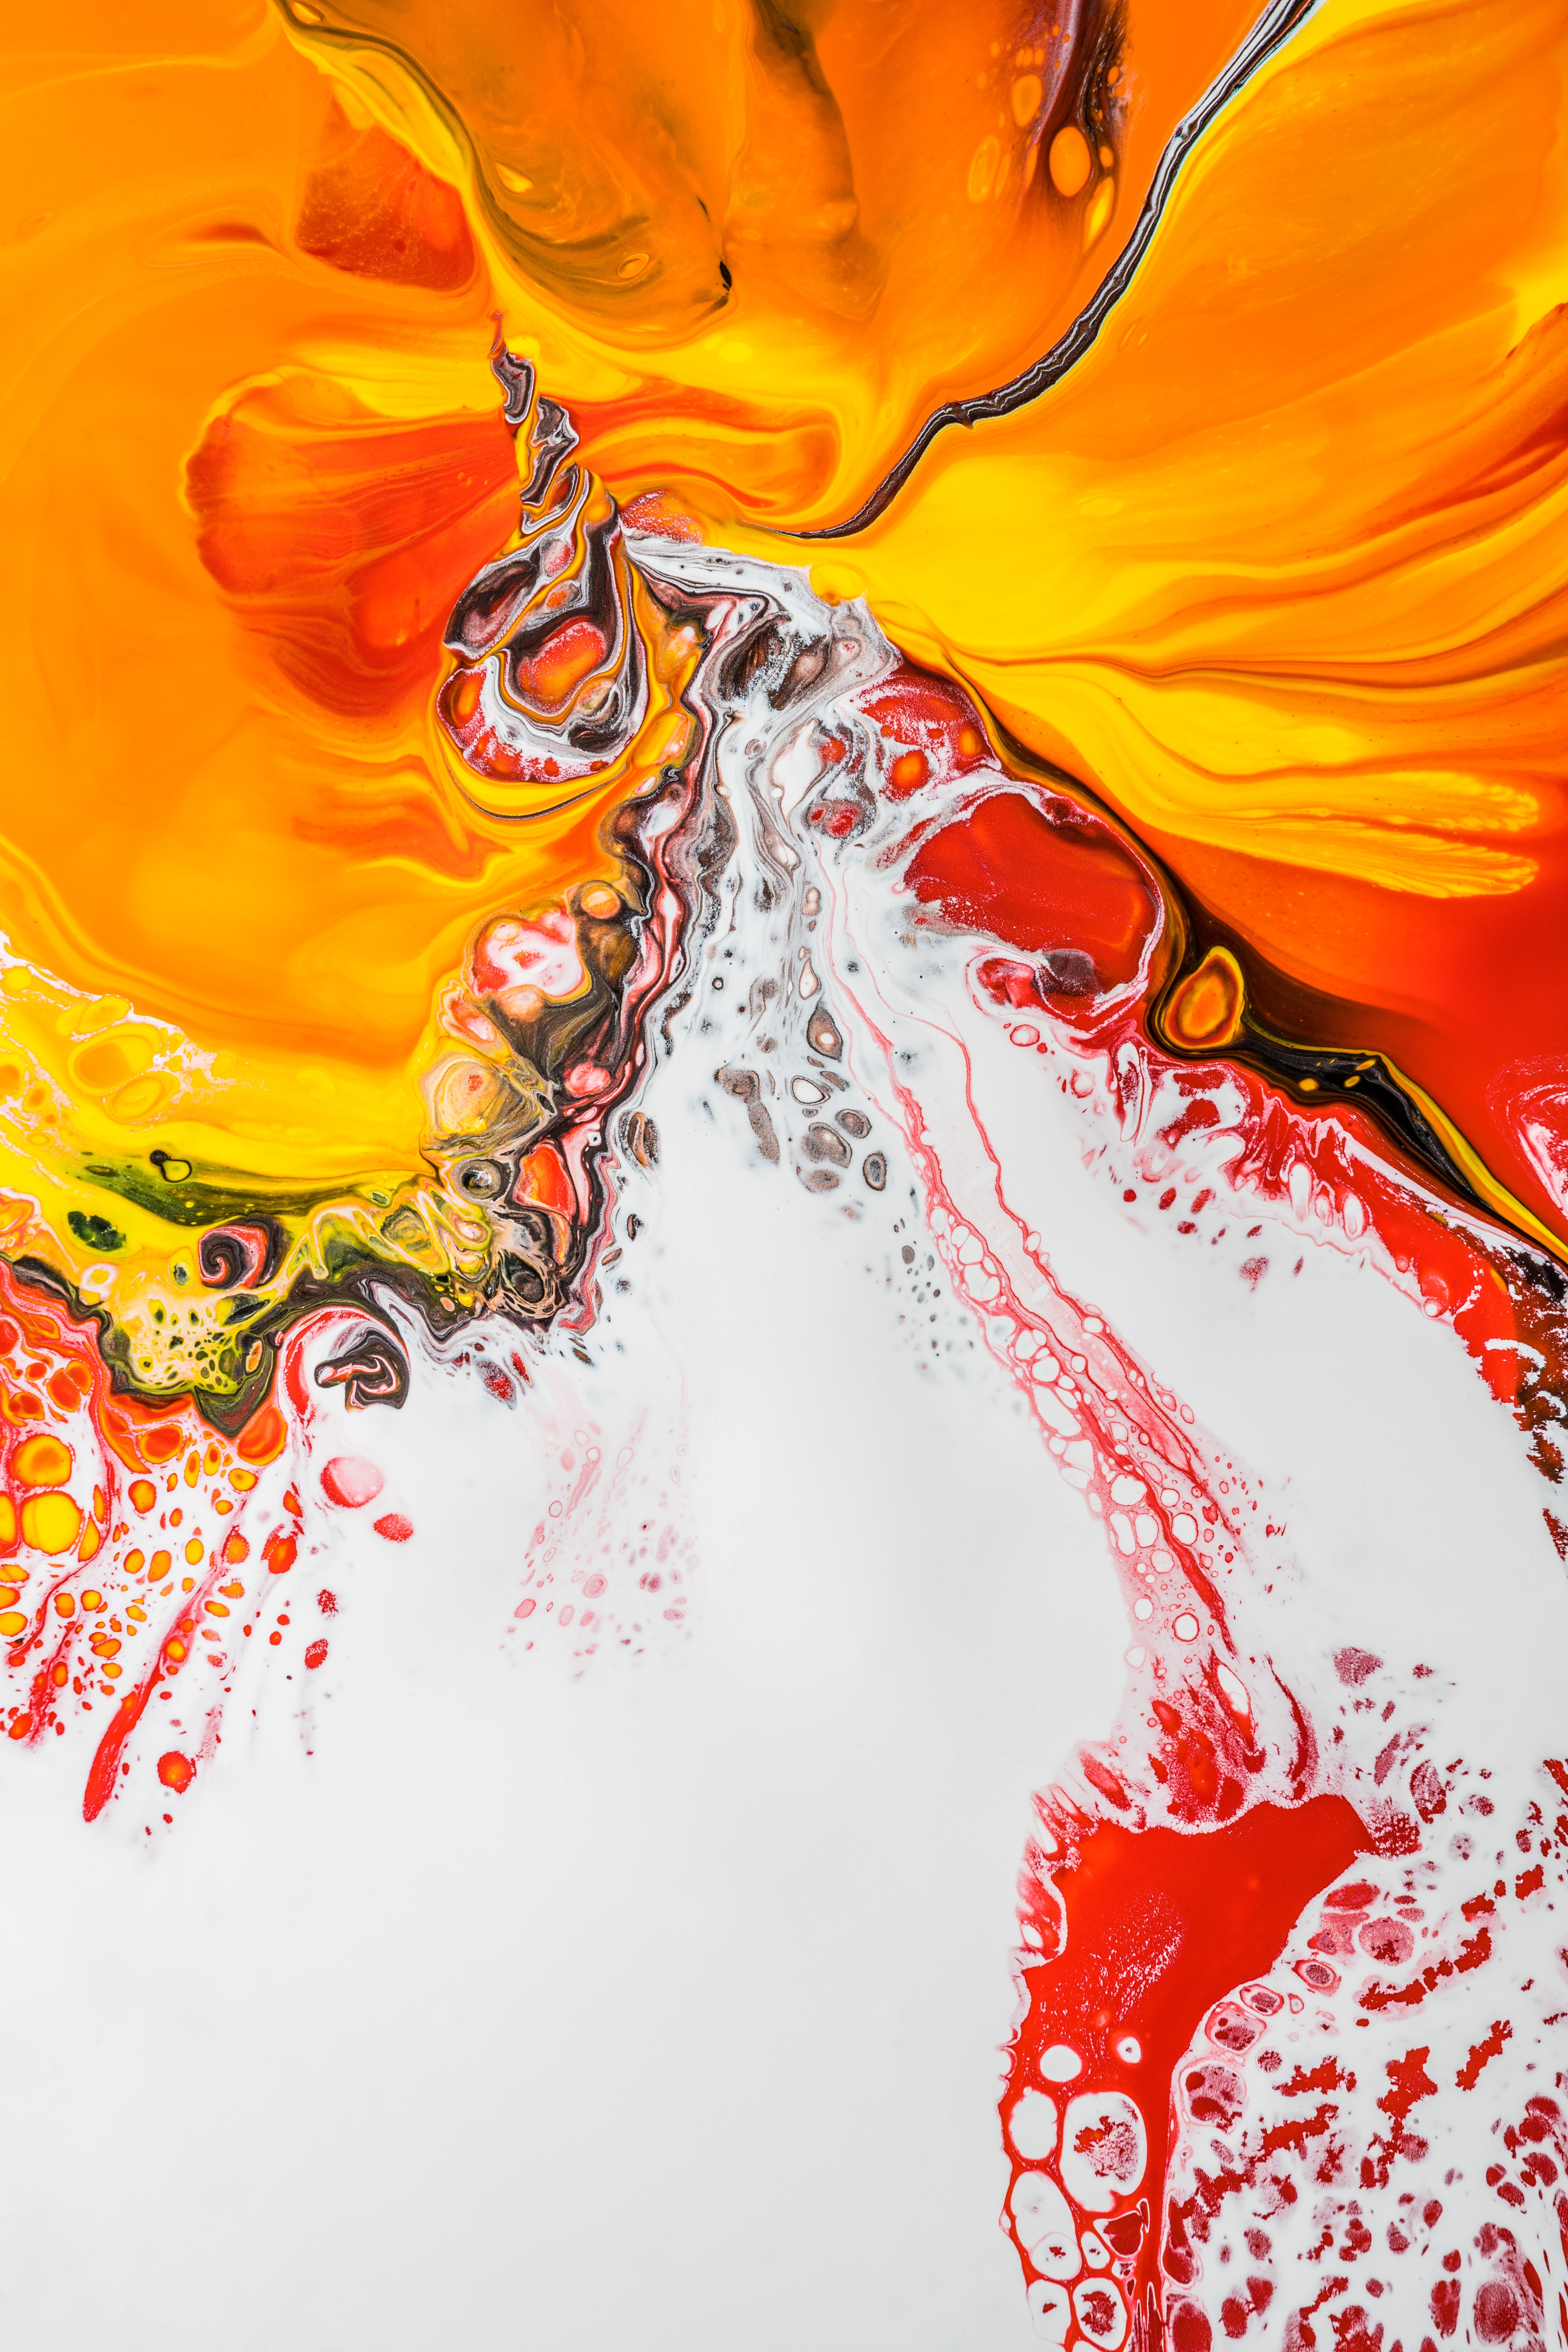 135867 download wallpaper stains, abstract, bright, divorces, paint, liquid, spots screensavers and pictures for free